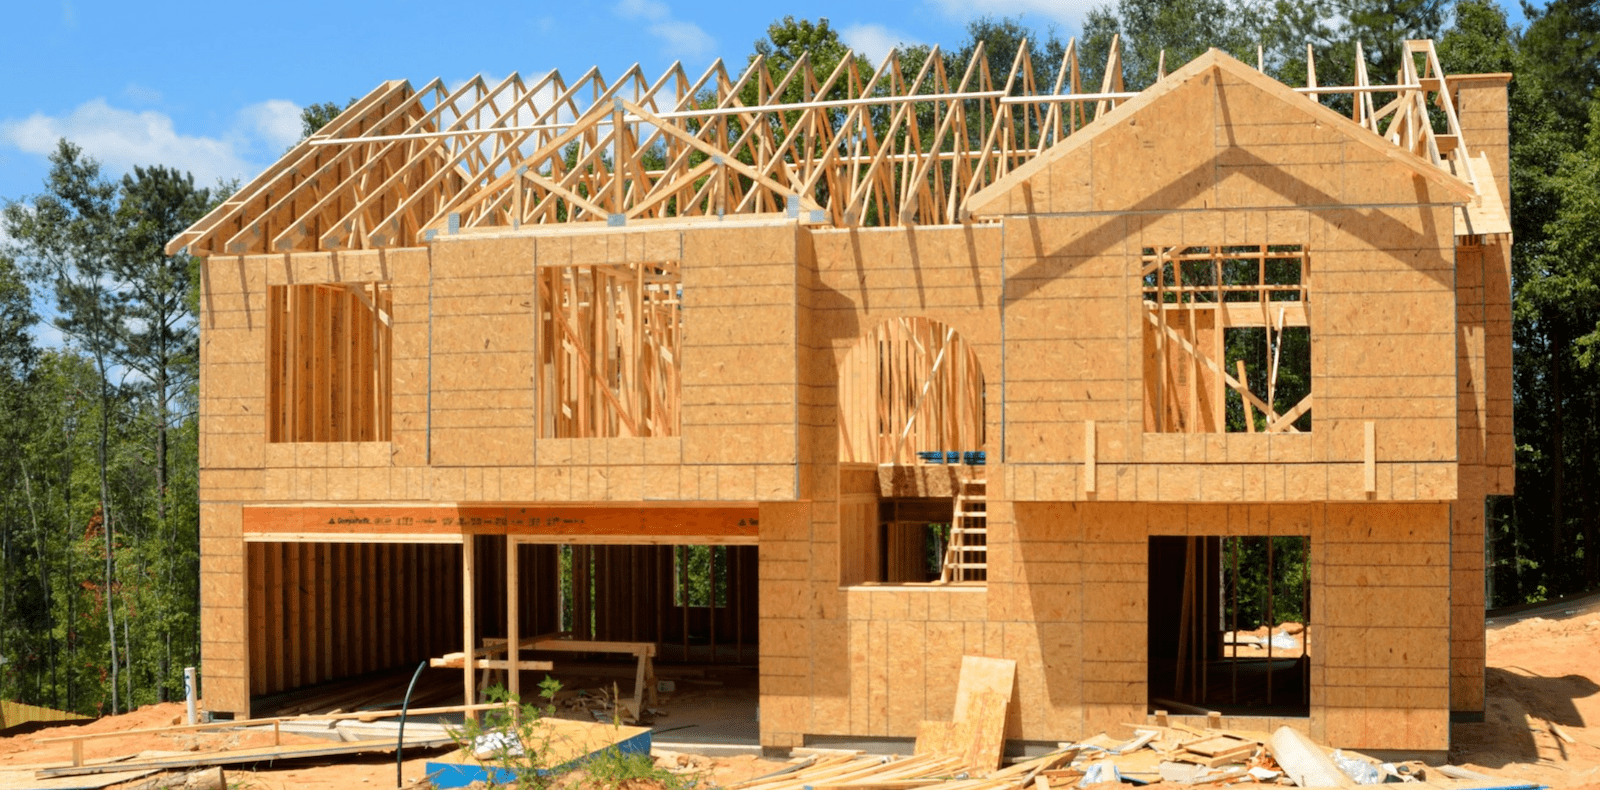 Build new homes faster in California